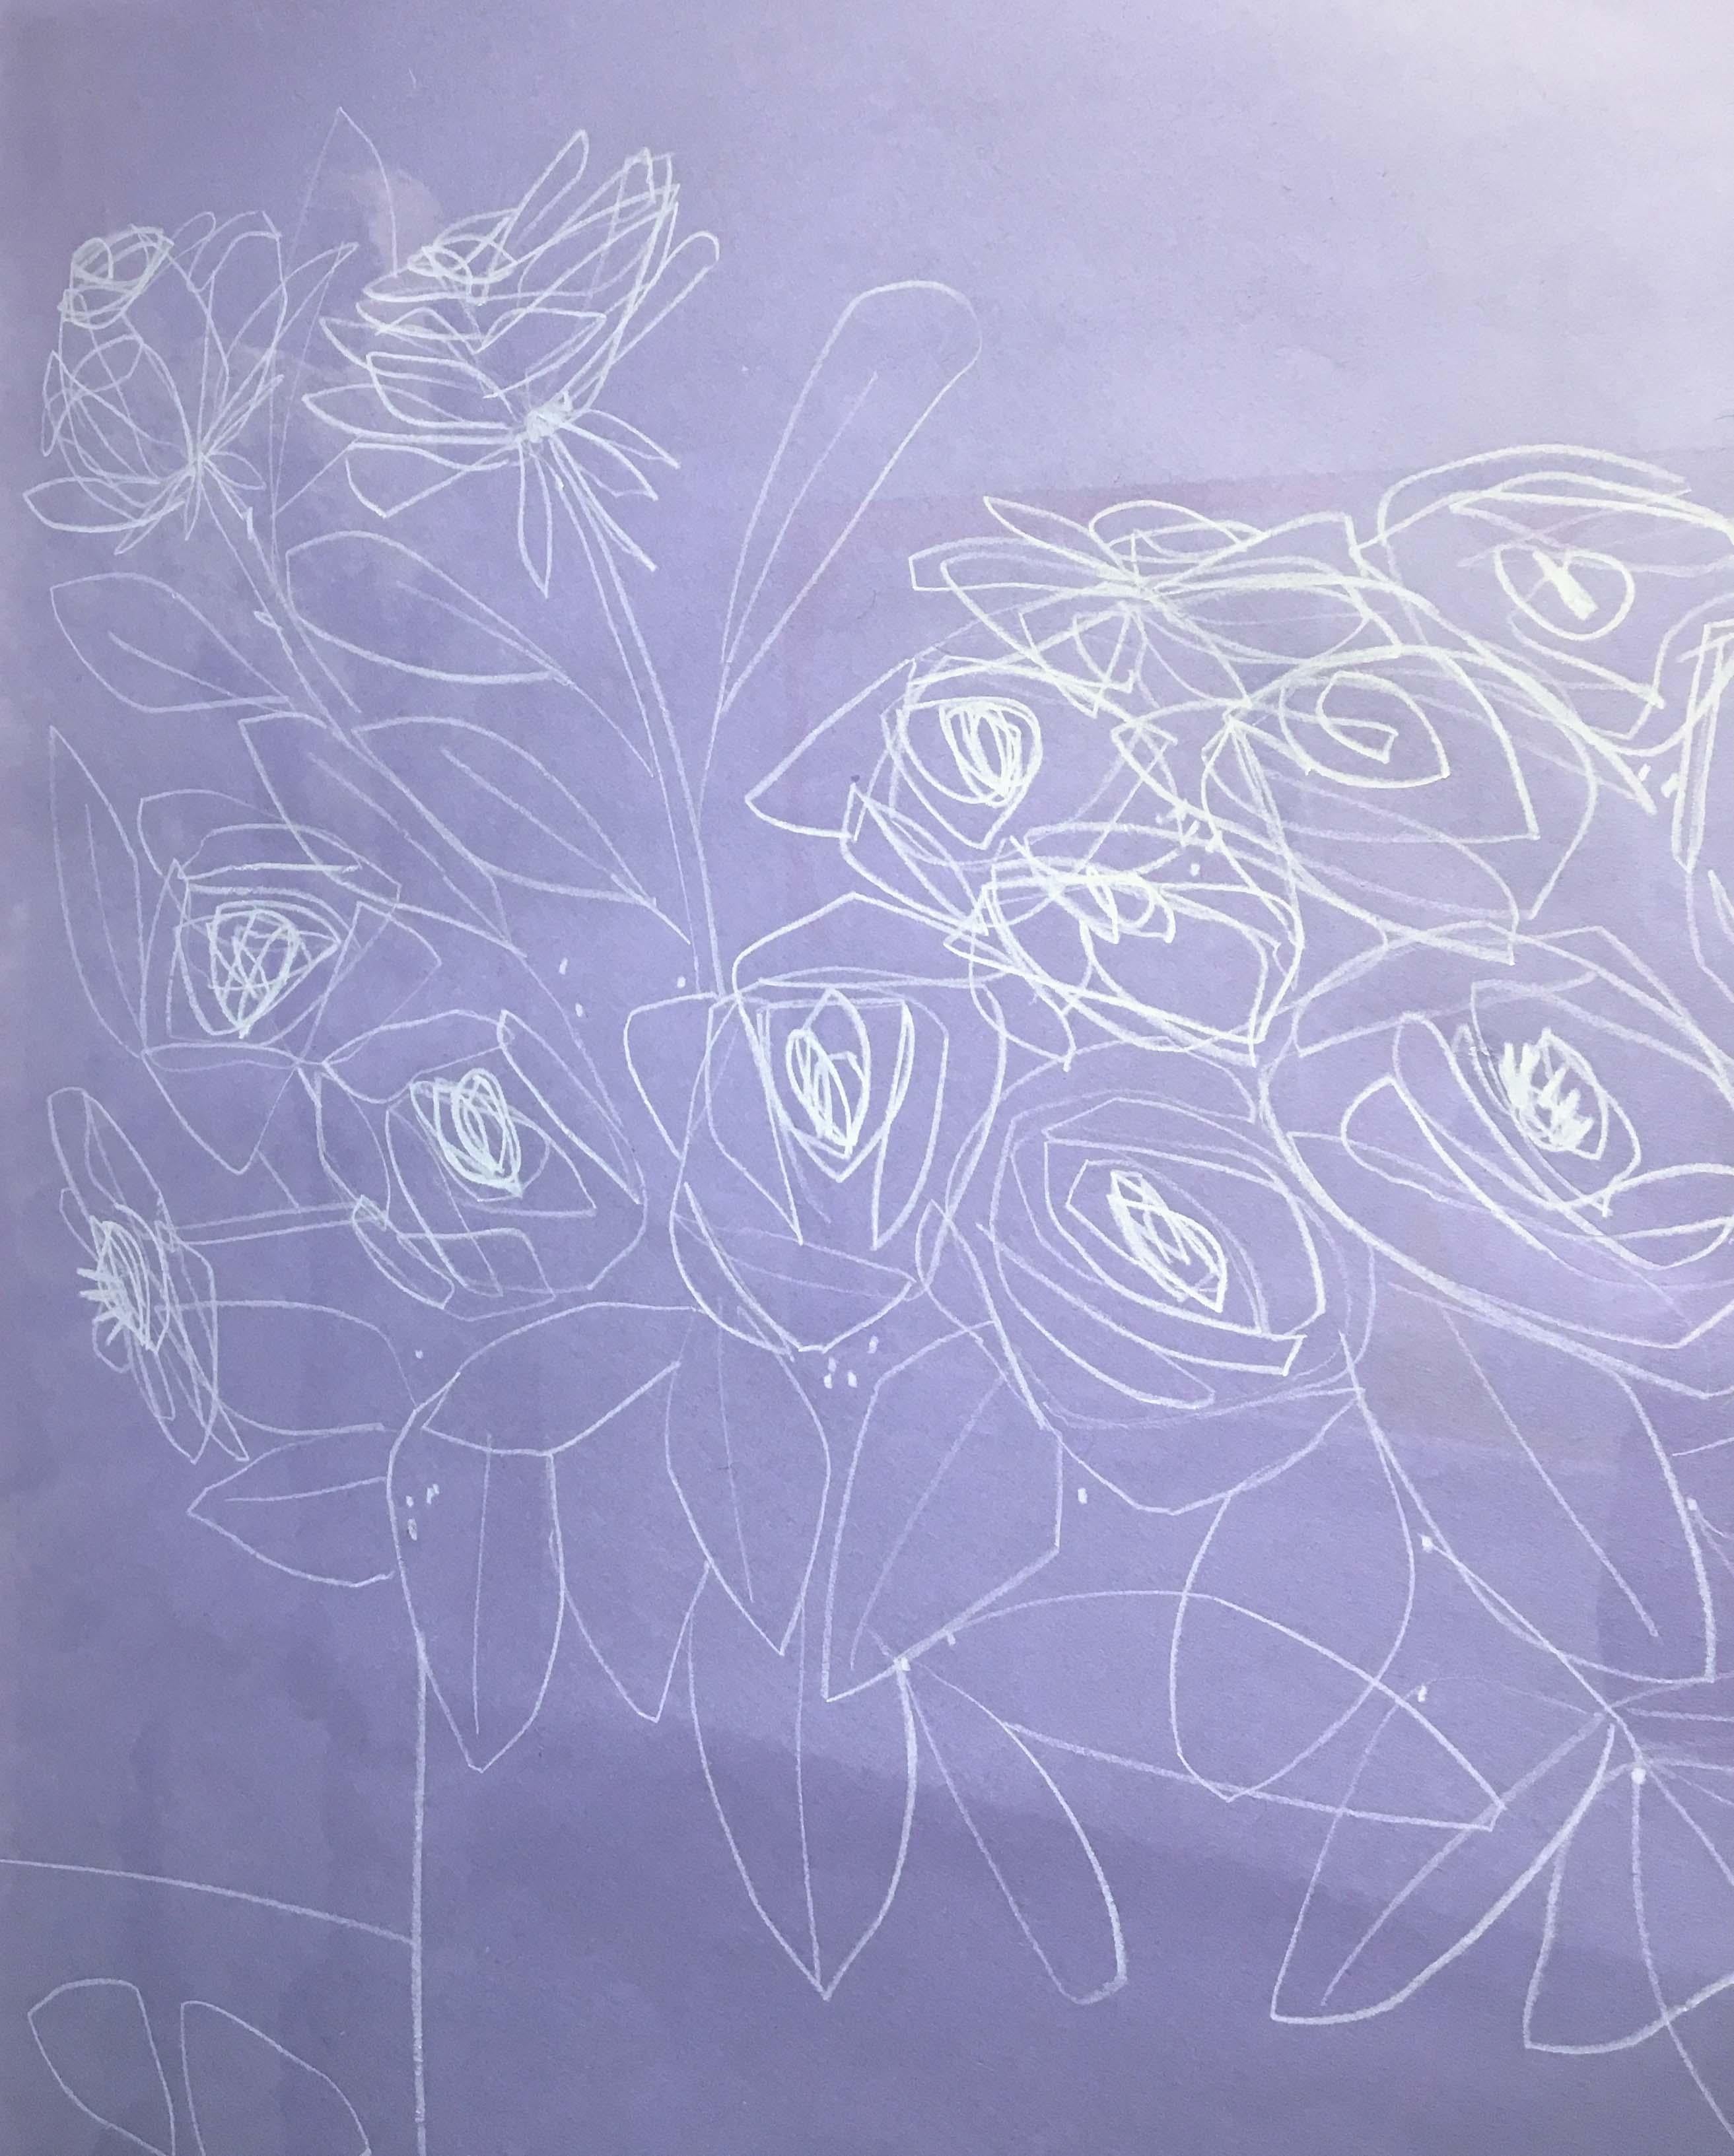 Roses on Violet Paper, America Martin, Pencil on Handmade Paper, 2019 2